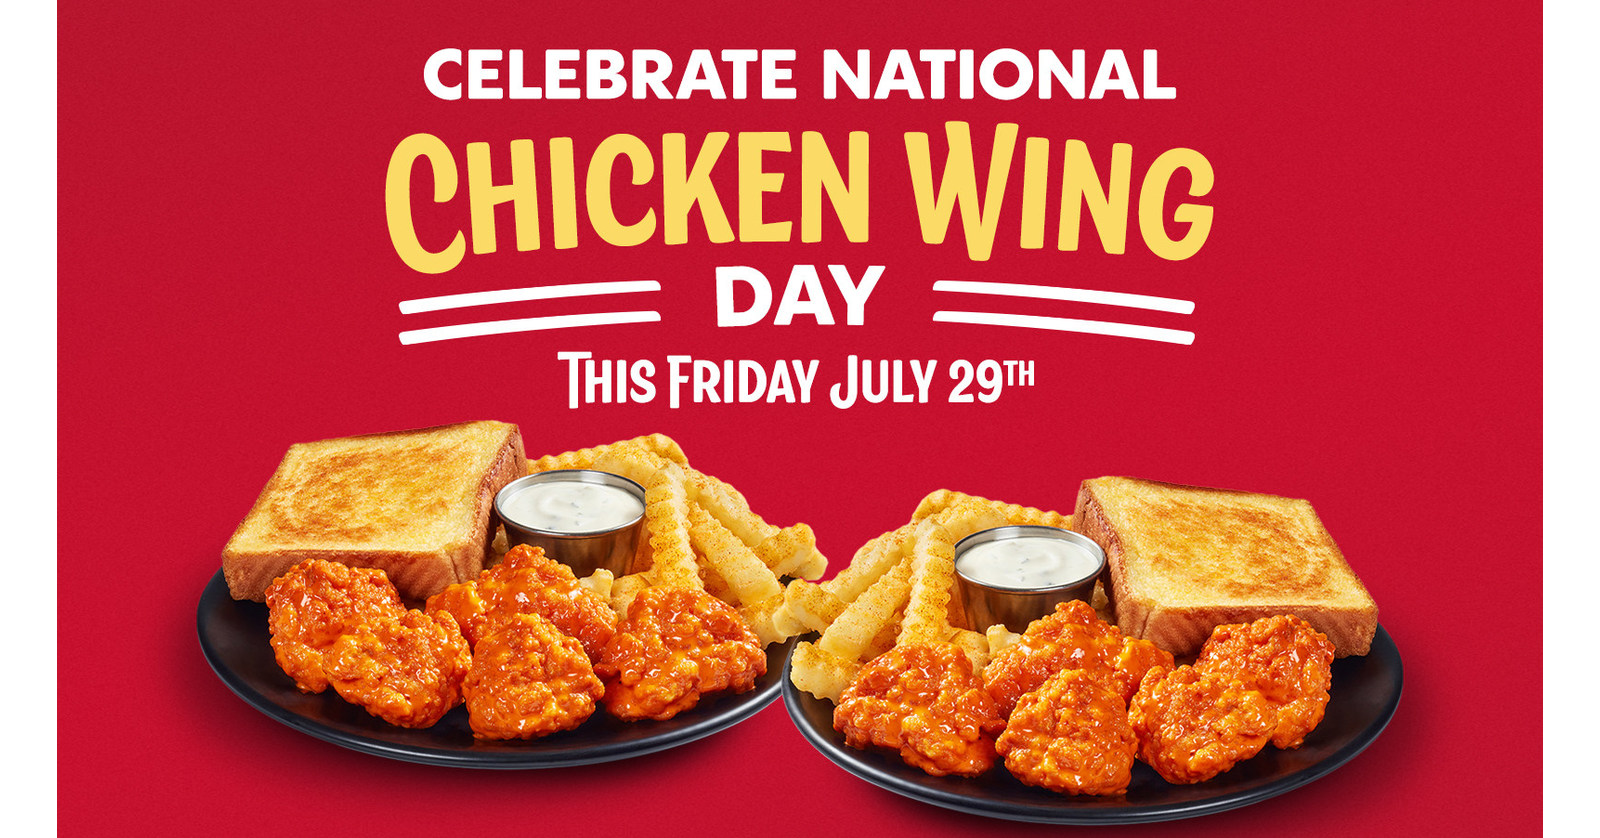 to National Chicken Wing Day!